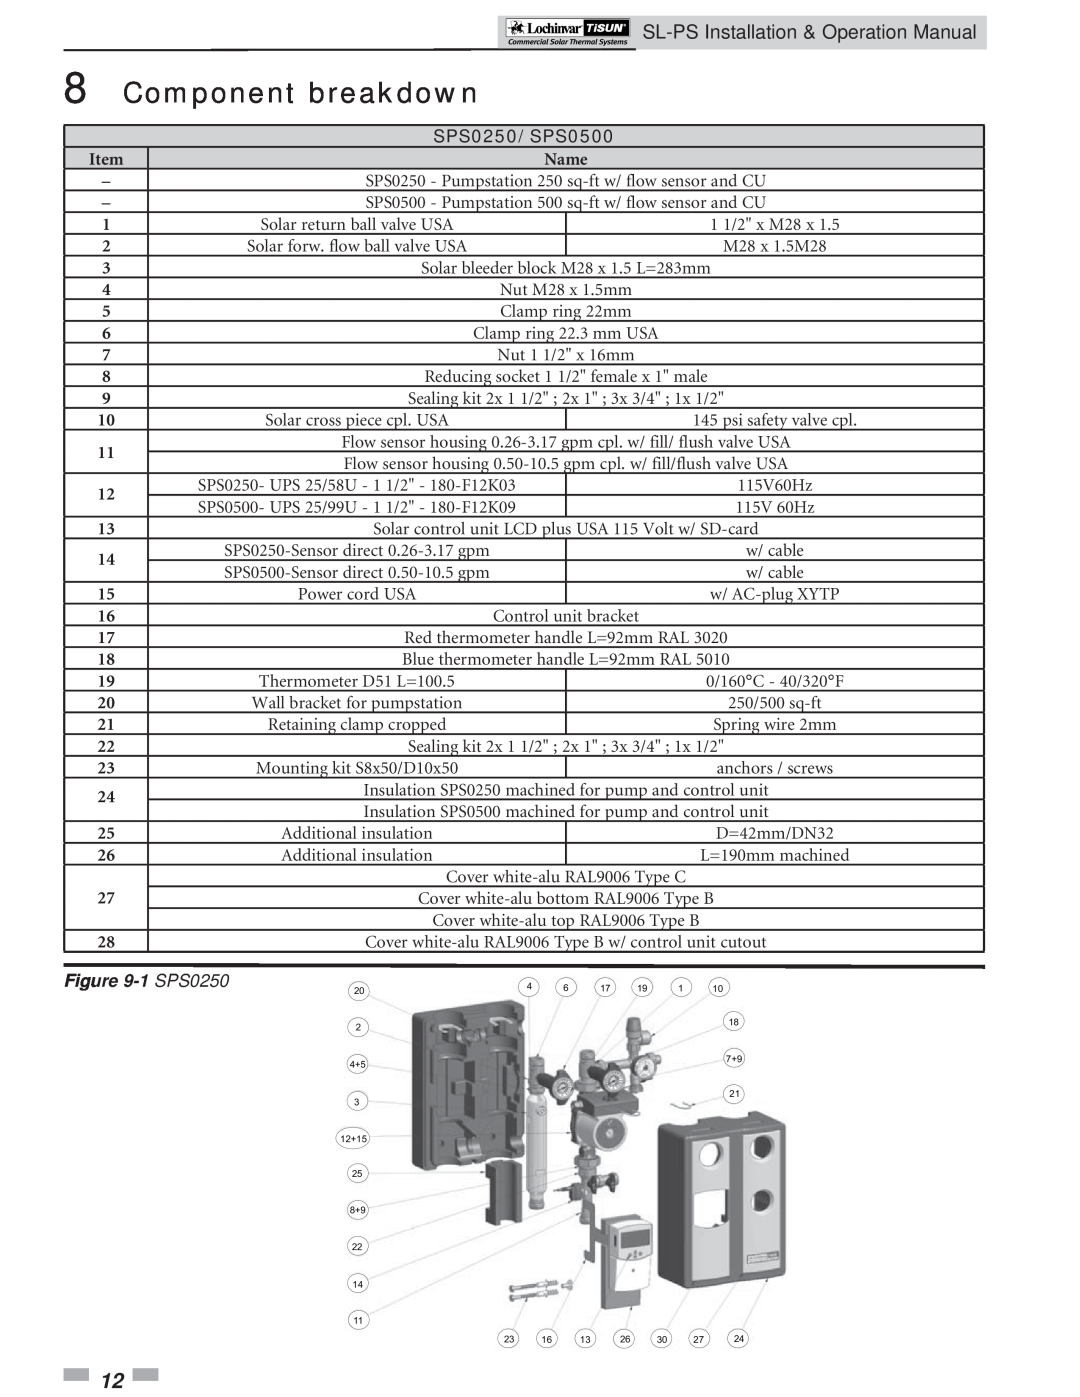 Lochinvar PS1000 operation manual Component breakdown, SPS0250/ SPS0500, Name, 1 SPS0250 